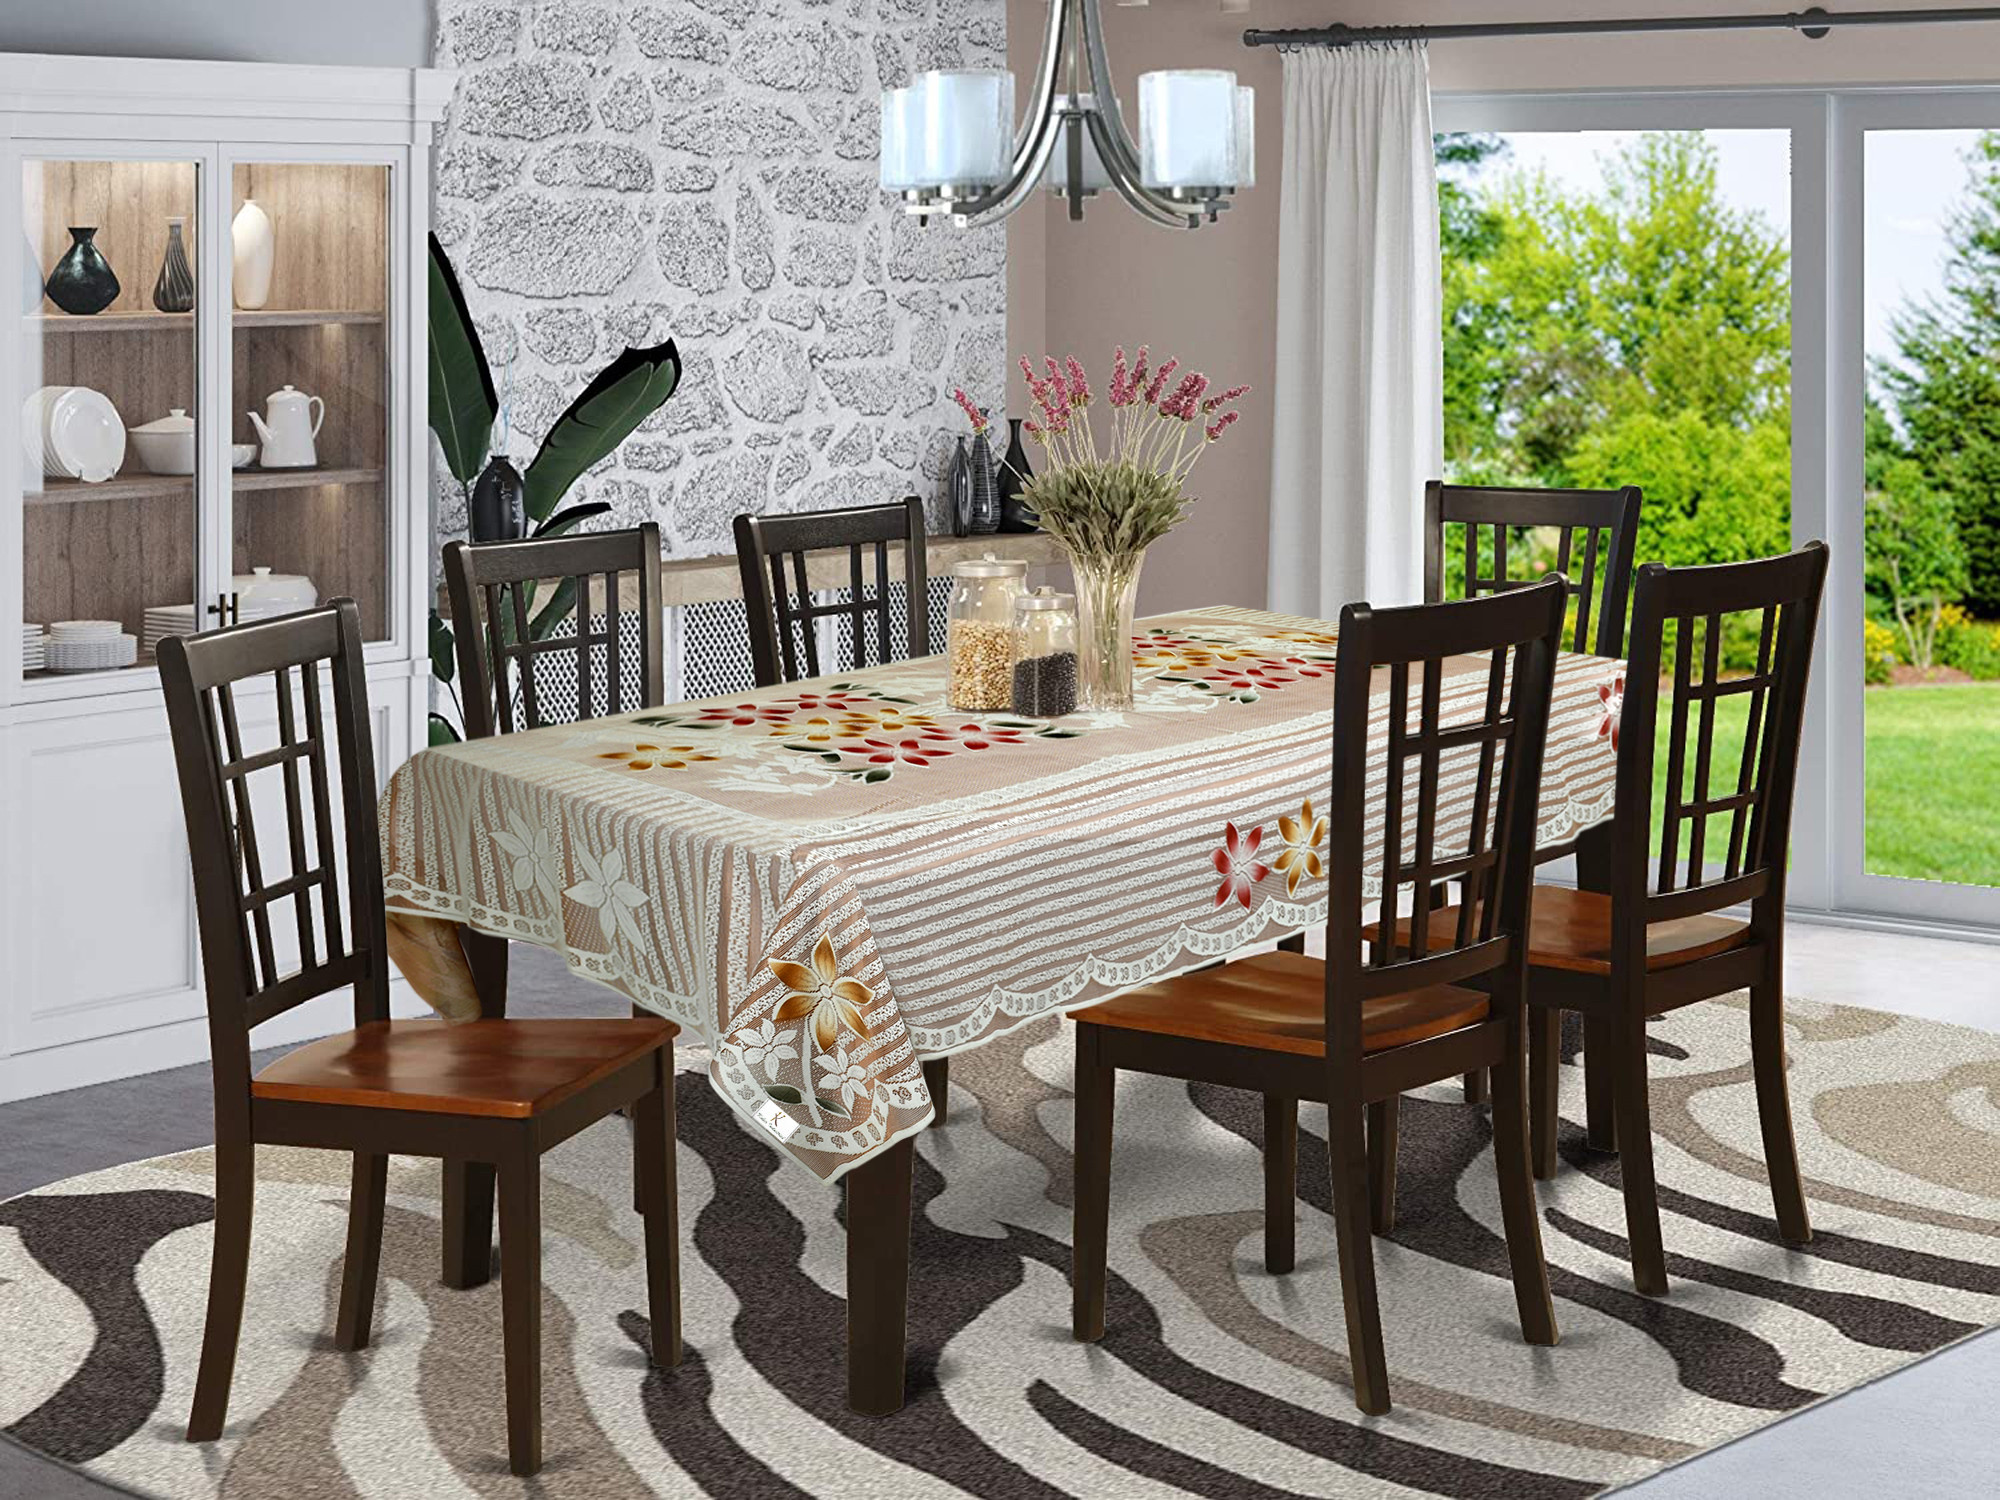 Kuber Industries Fruit Print Cotton 6 Seater Dining Table Cover 60